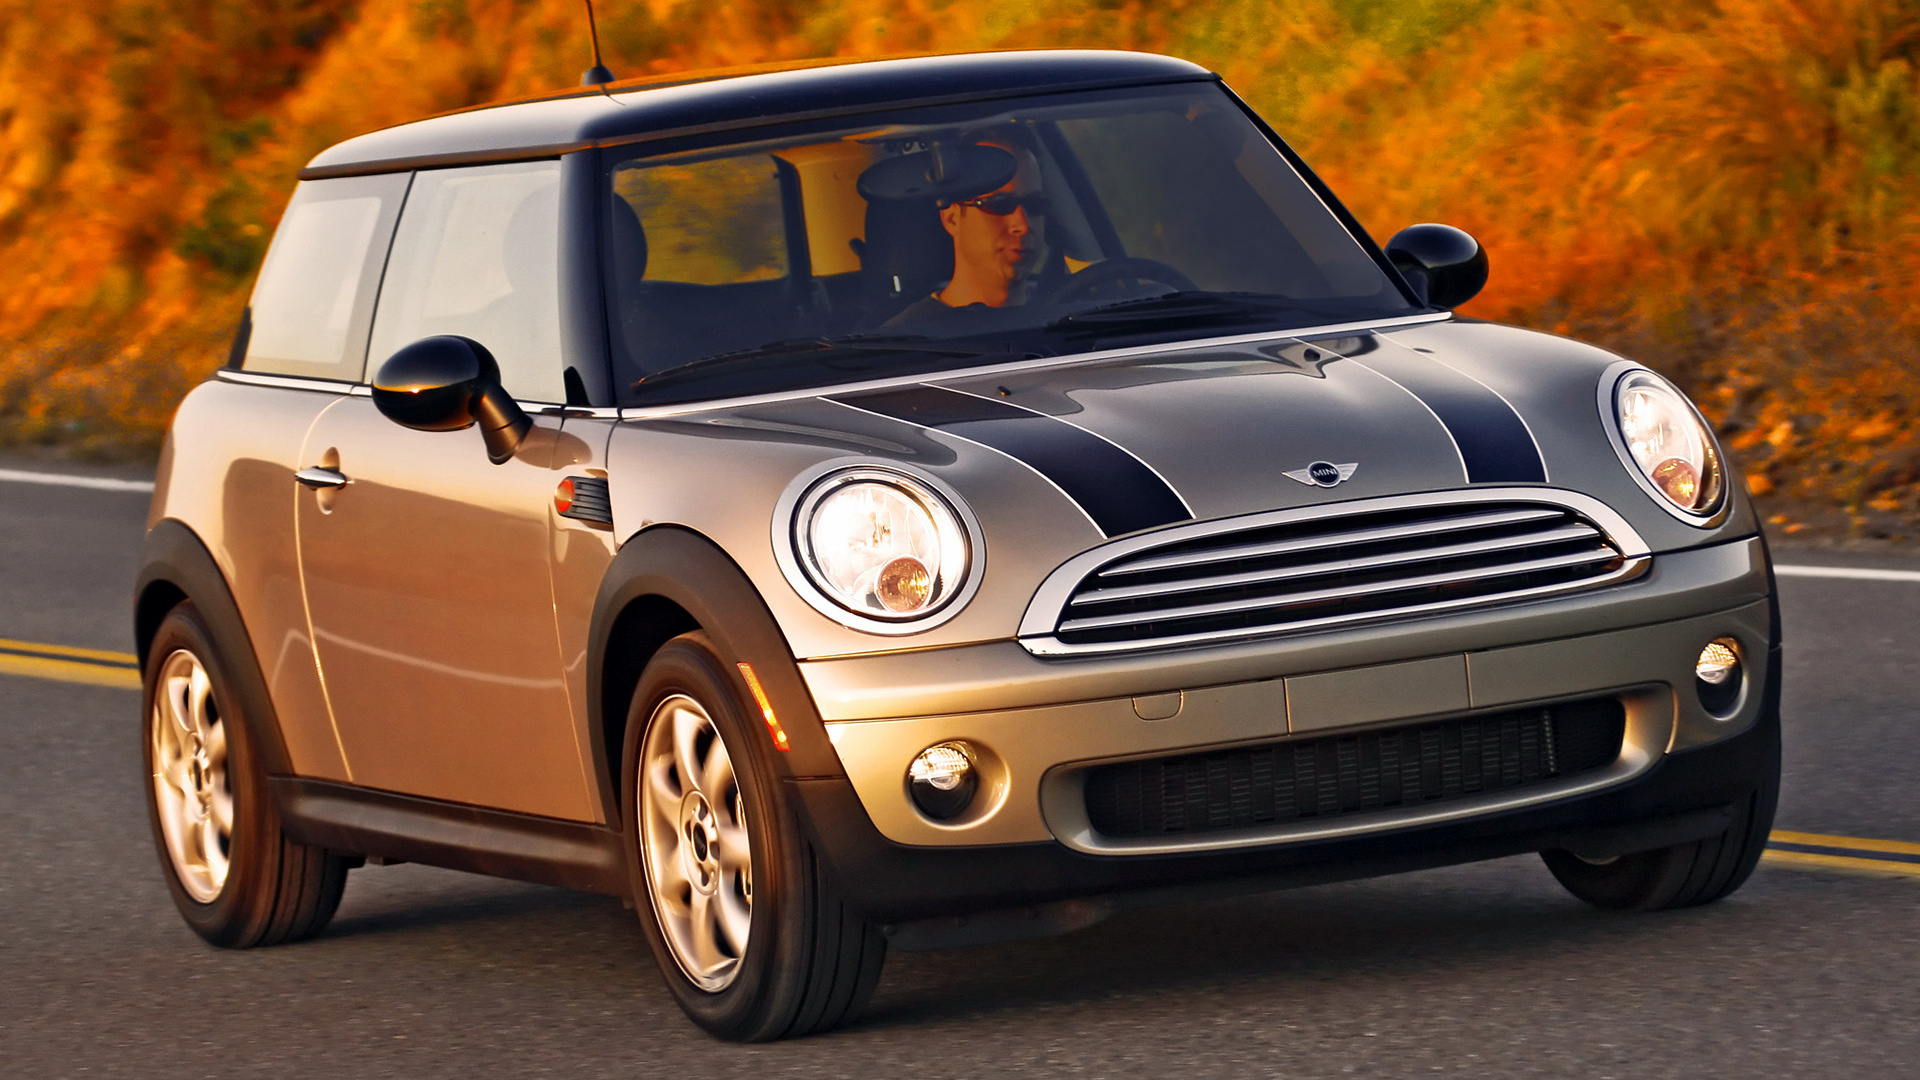 Mini Cooper (2006) US Wallpapers and HD Images - Car Pixel